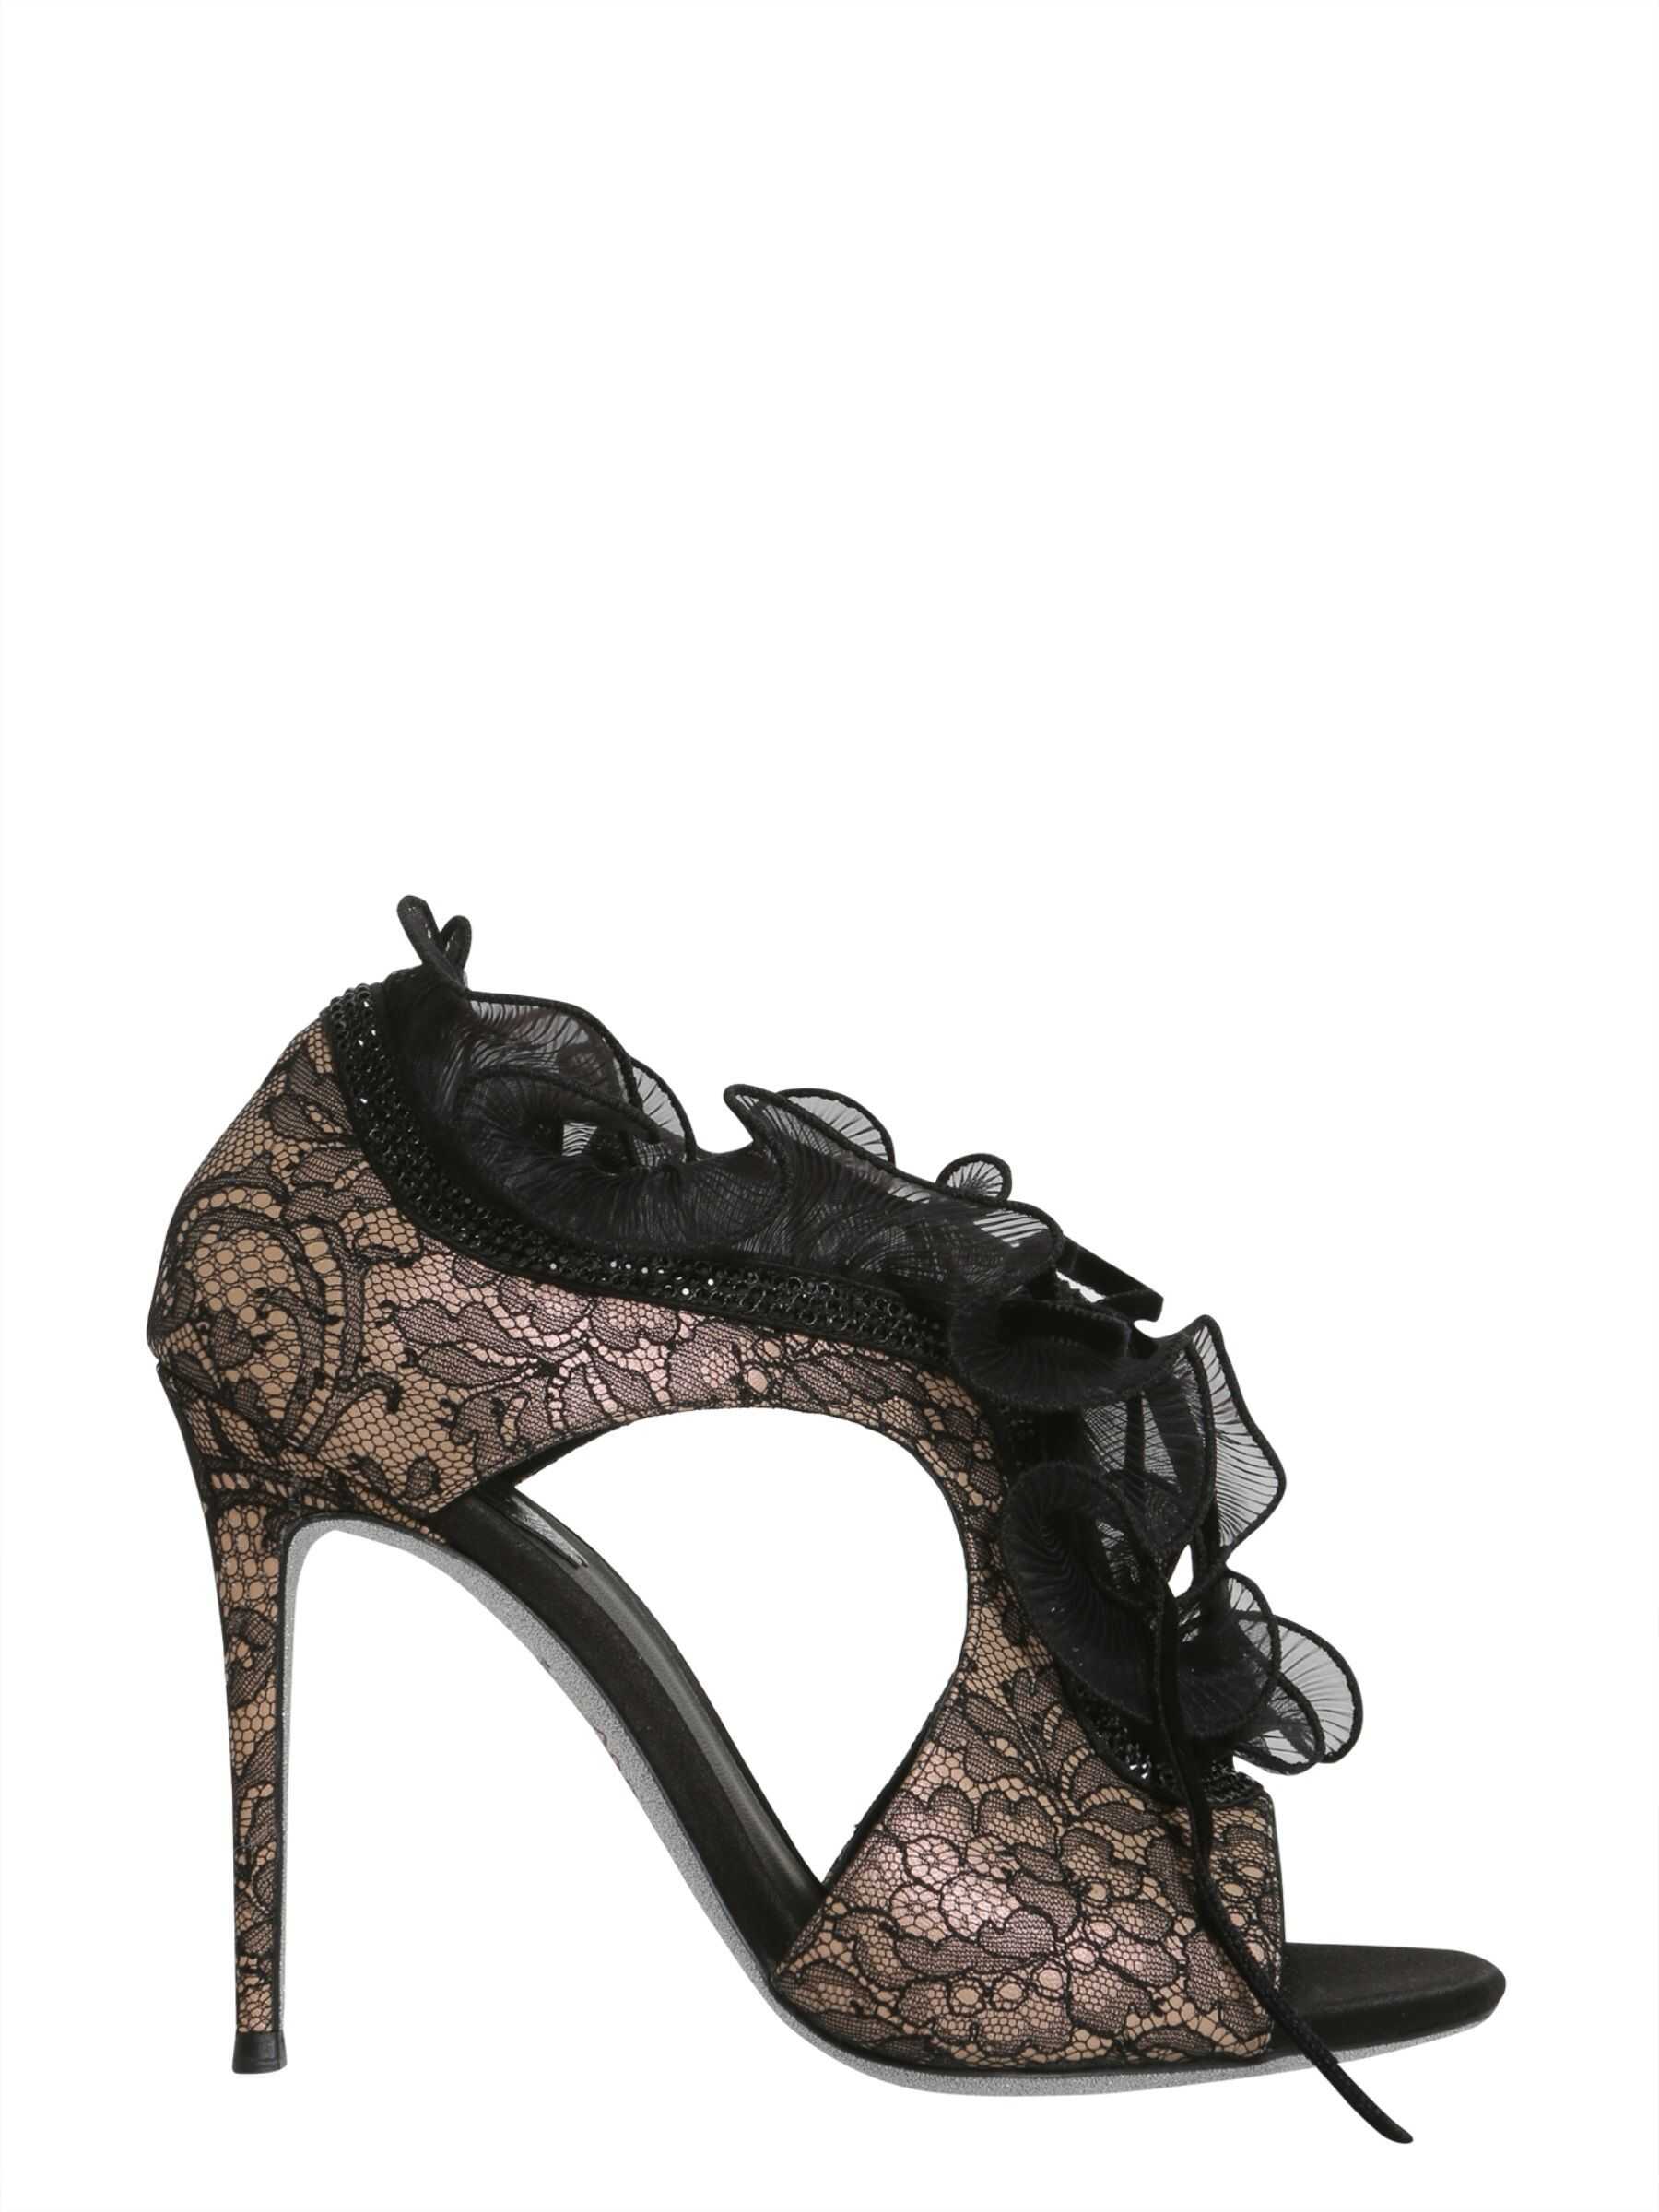 Rene Caovilla Satin Sandals With Ruches PINK